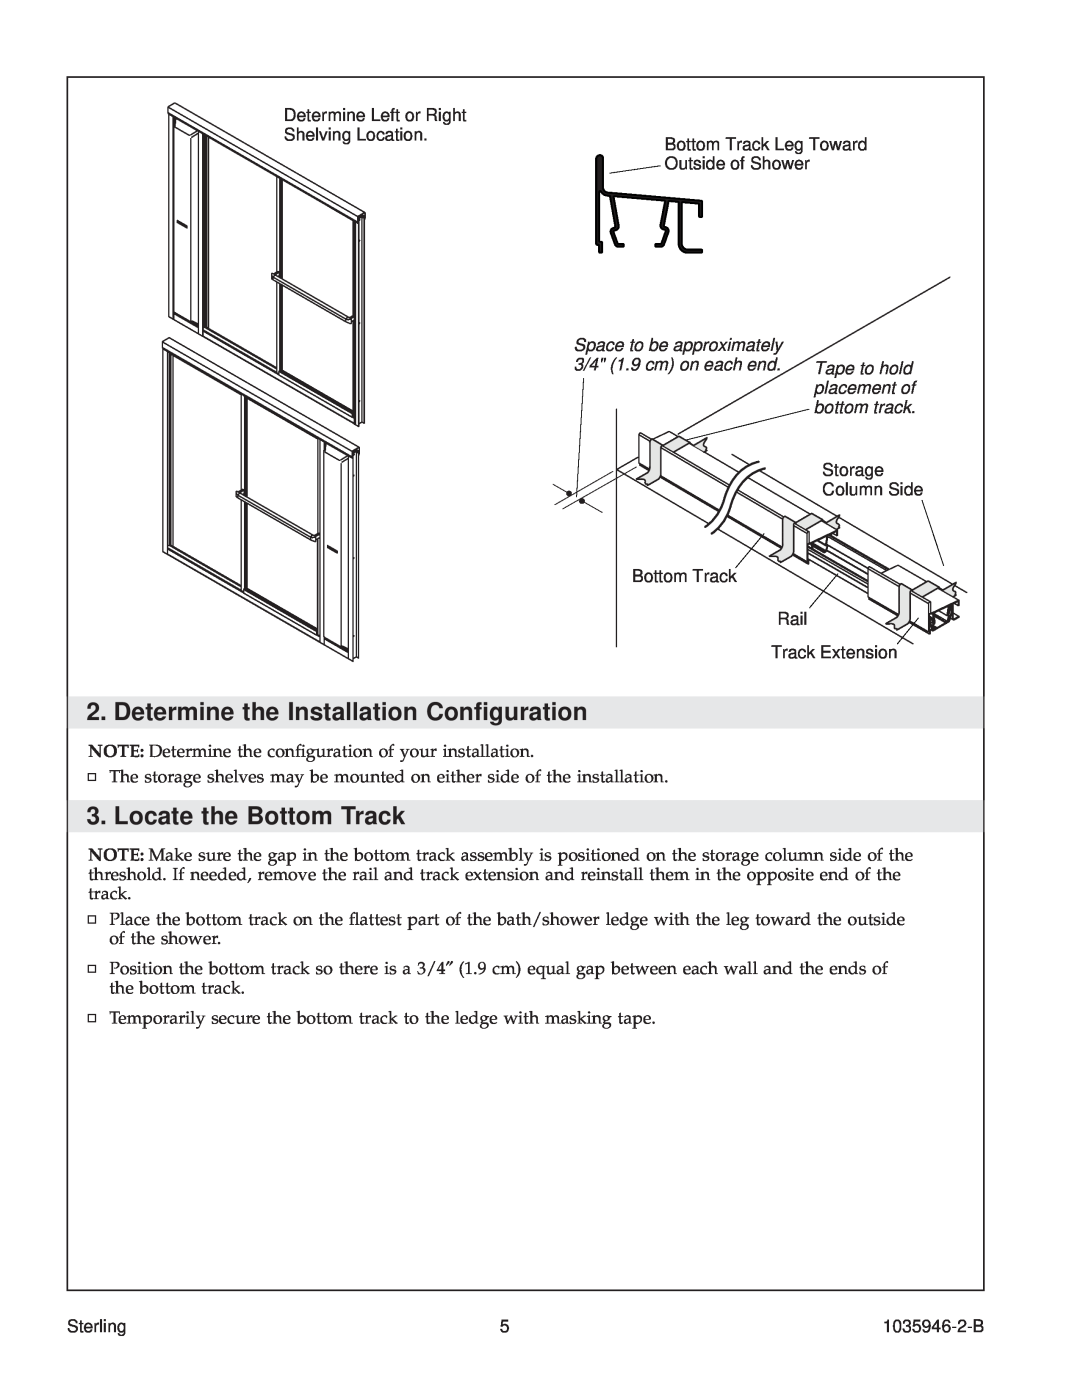 Sterling Plumbing 6065, 6075 Determine the Installation Conguration, Locate the Bottom Track, Space to be approximately 